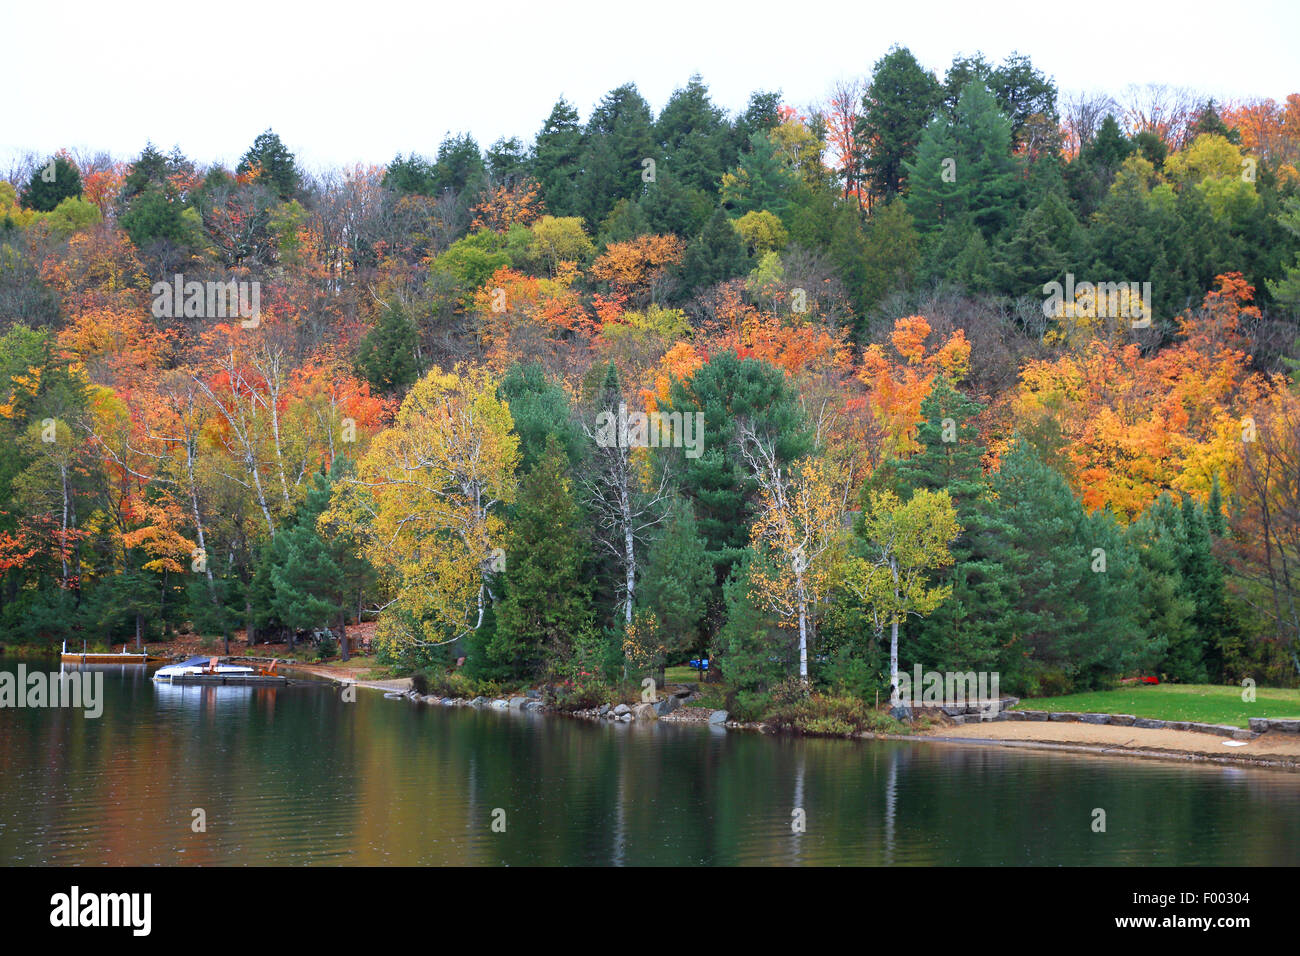 Indian Summer at the border of the Algonquin Provincial Park, Canada, Ontario, Algonquin Provincial Park Stock Photo